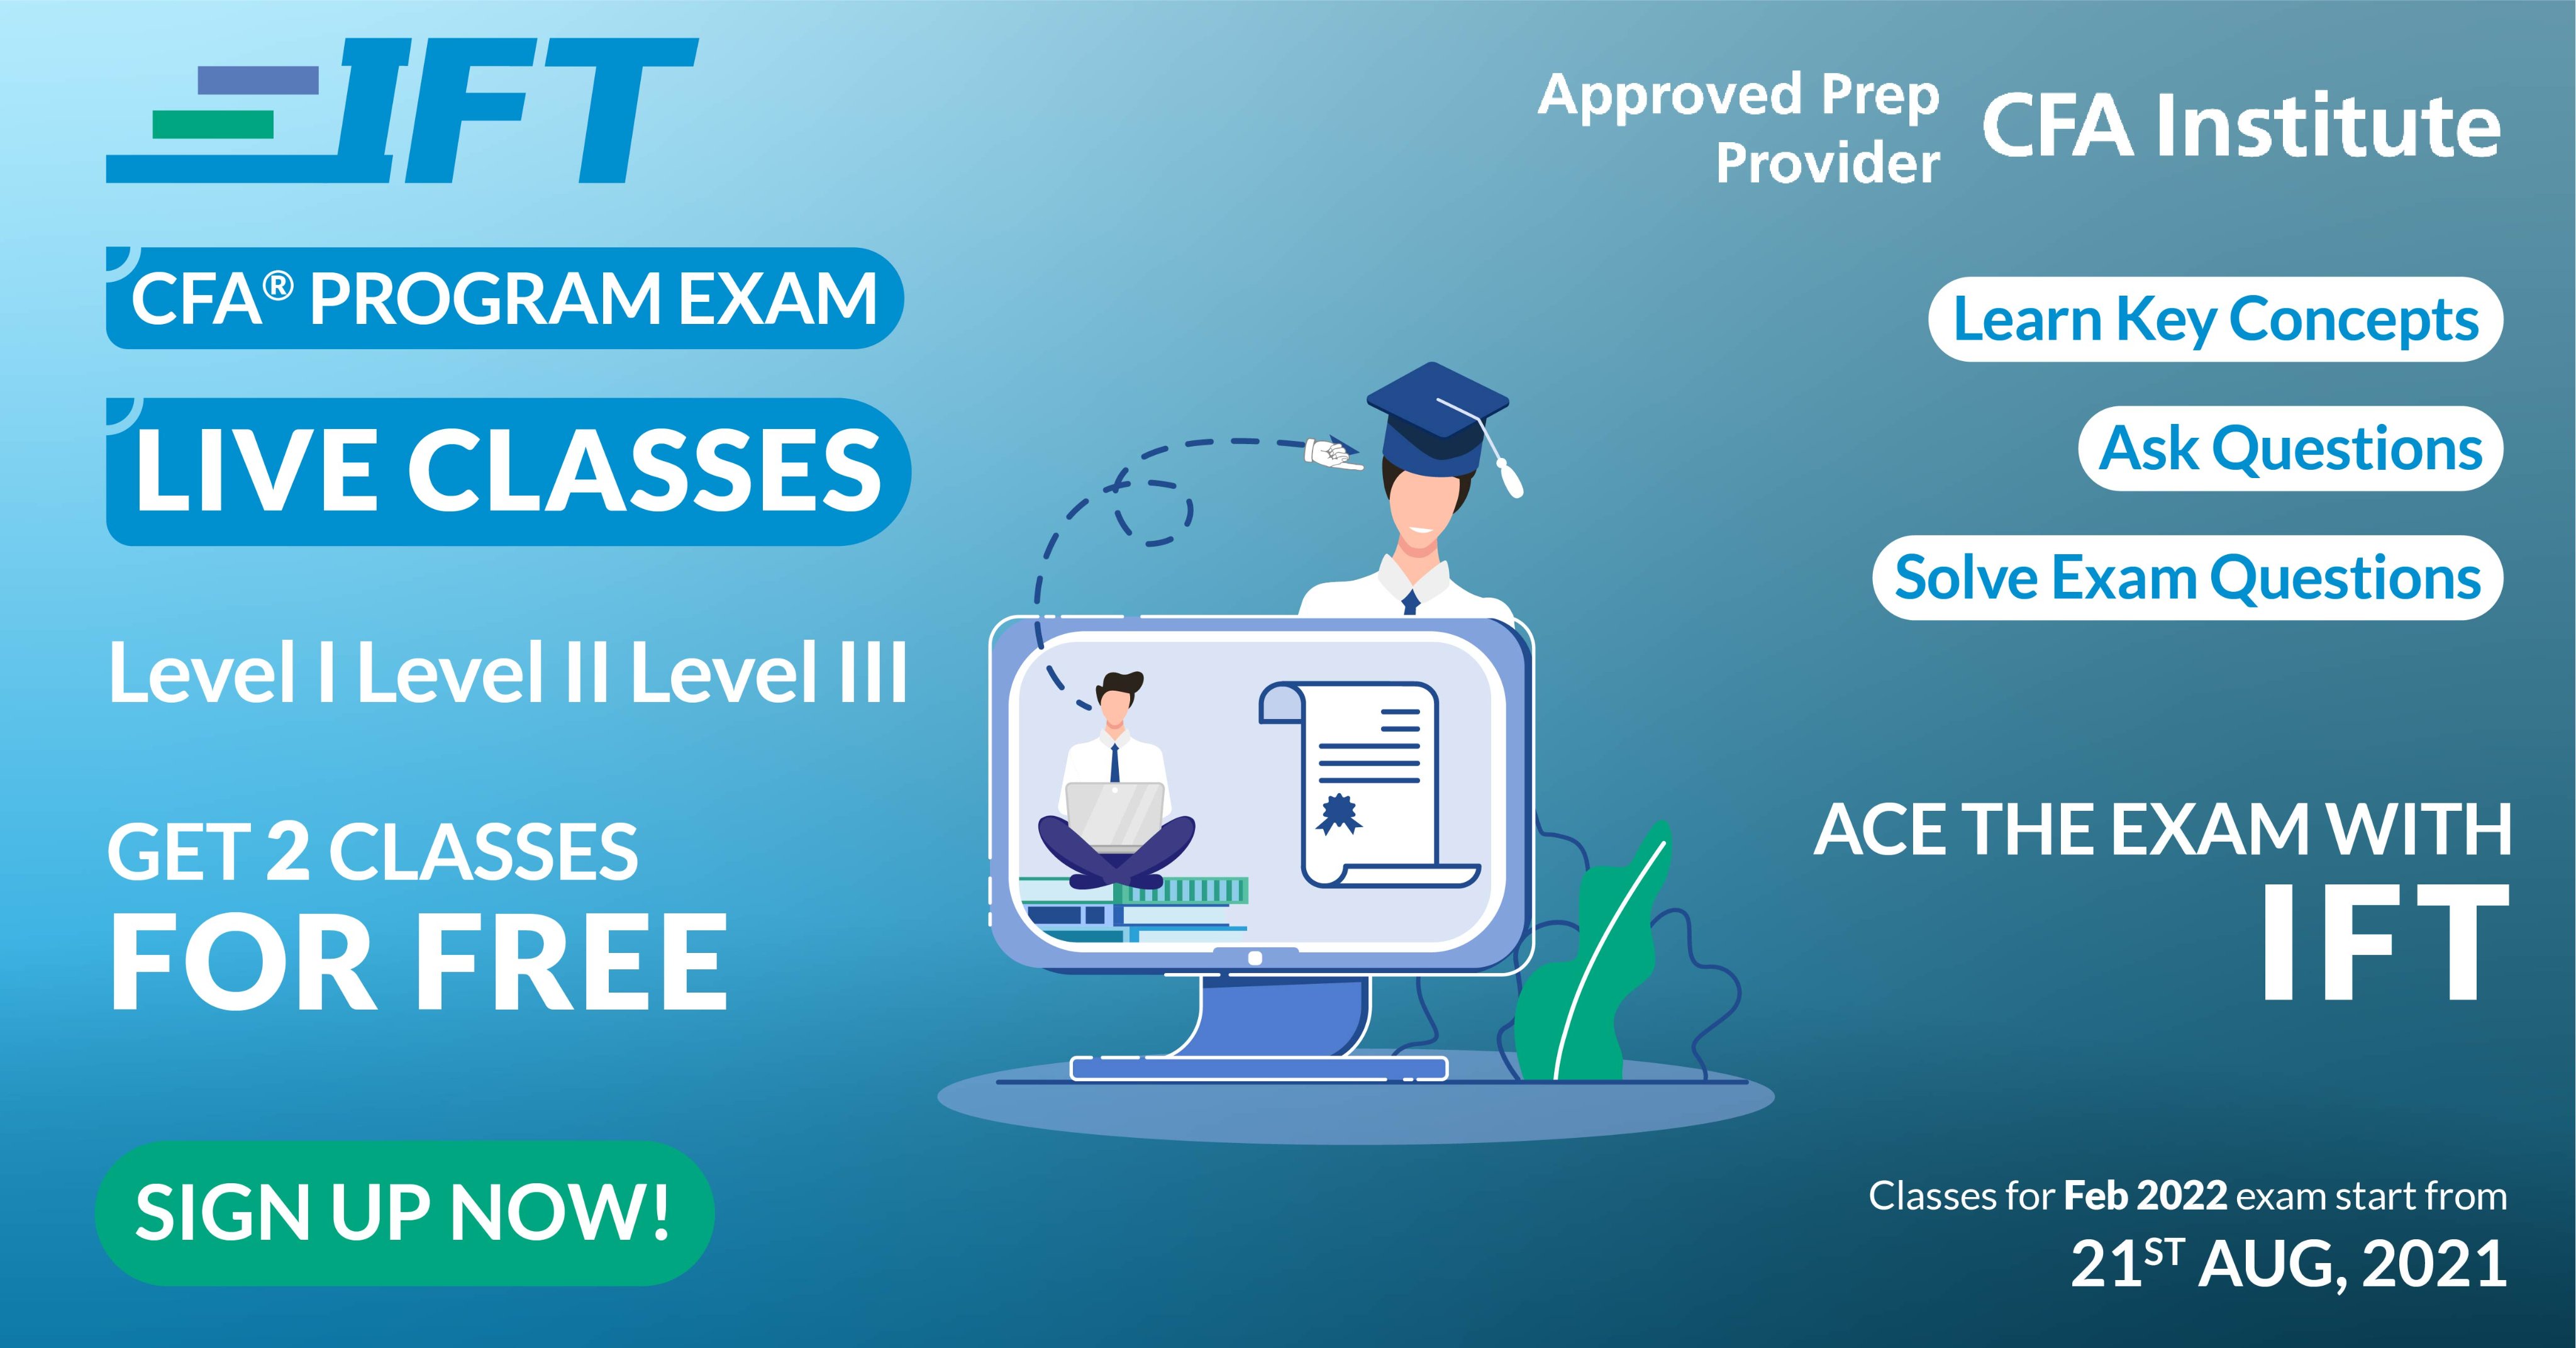 Ift 2022 Schedule Arif Irfanullah Ift On Twitter: "Ift's Cfa Live Classes For Feb 2022 Exams  Are Starting From Tomorrow! Don't Miss A Single Class And Get Ready To Ace  The Exam! Details: Https://T.co/Mbk3T4Gb6P Https://T.co/Dxyxvasz6O" /